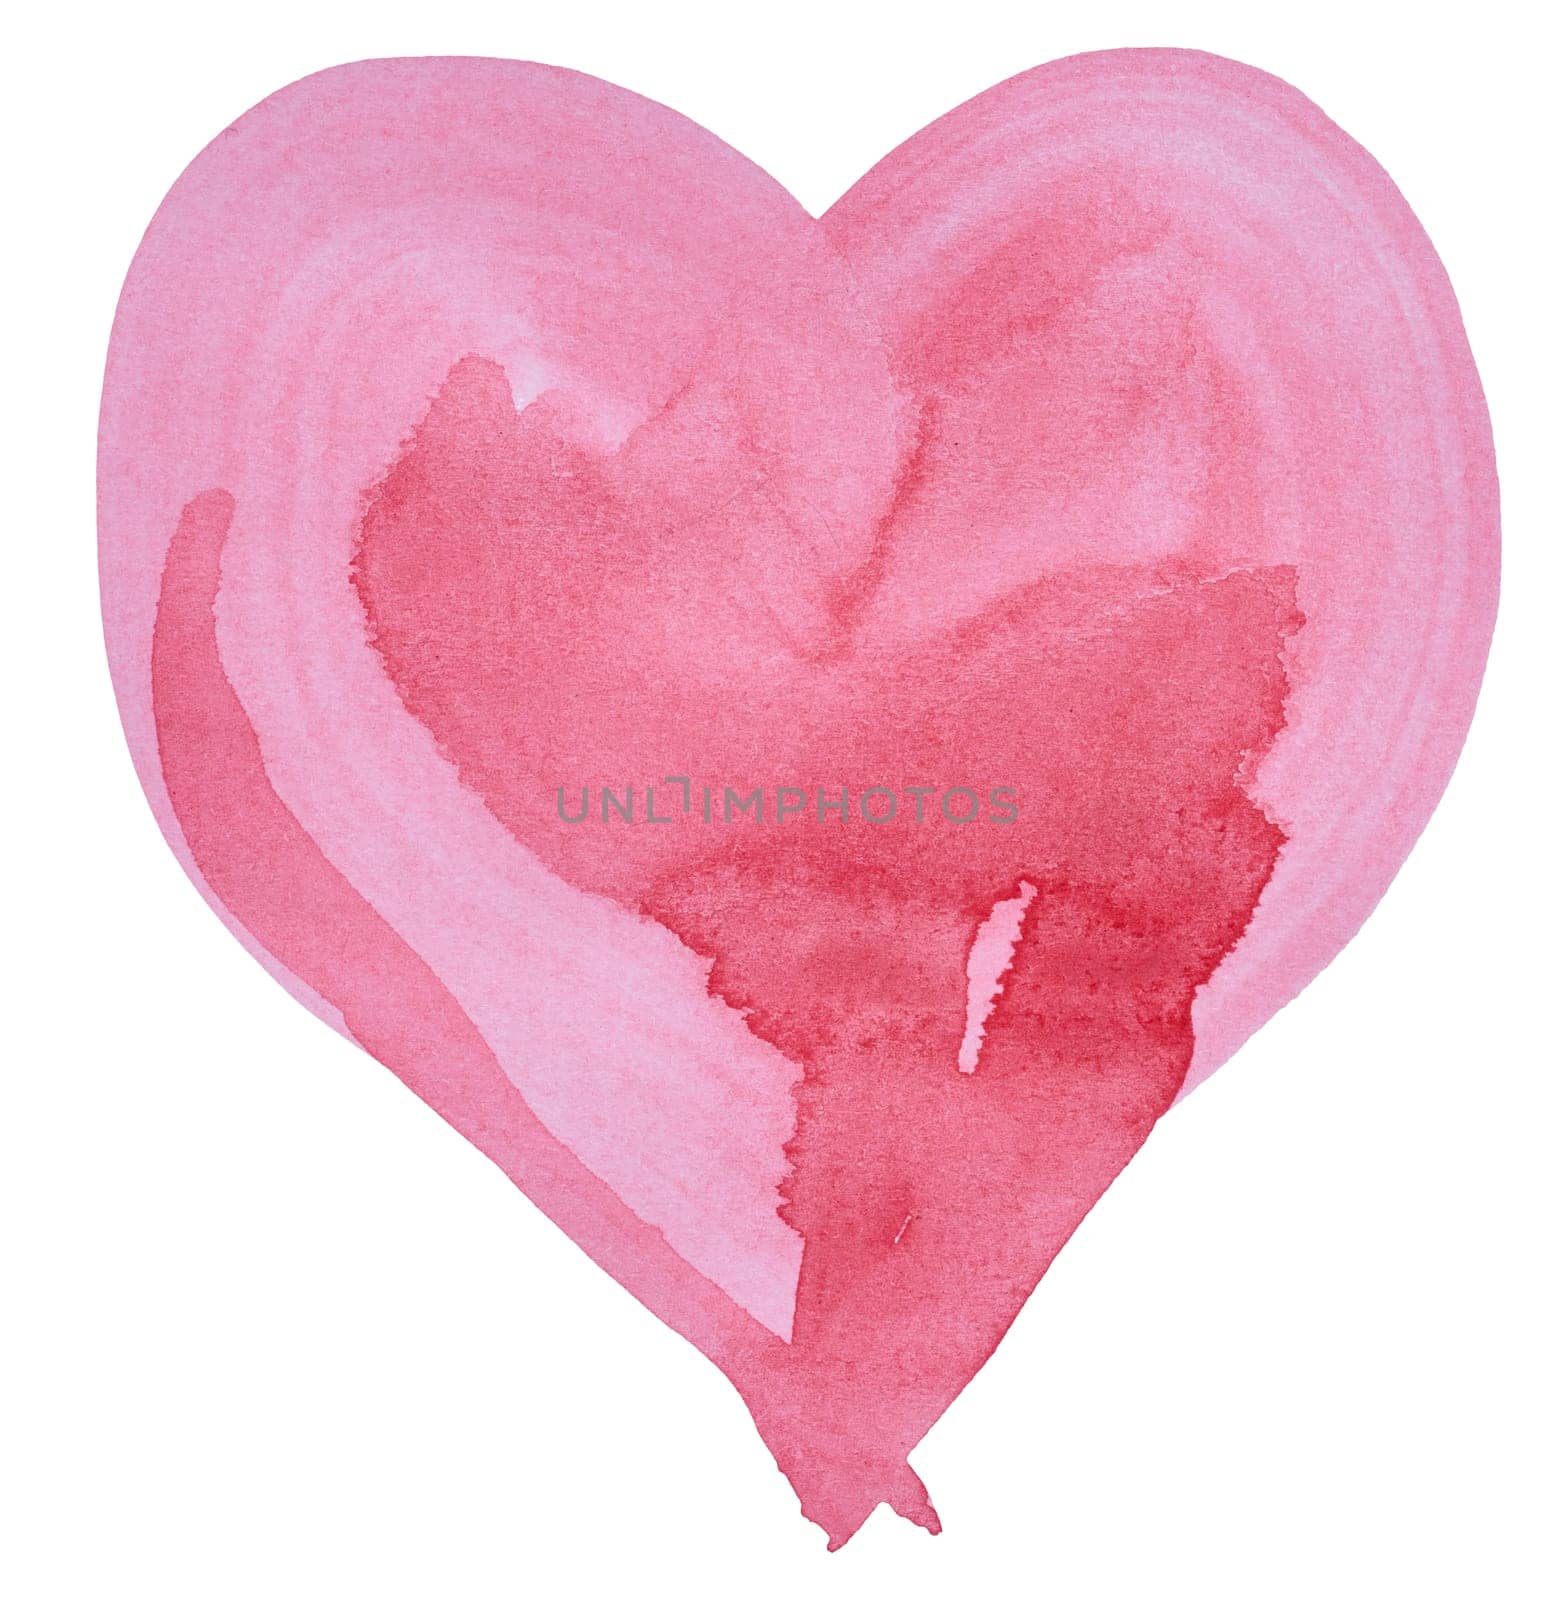 Heart drawn with watercolor paint, element for designer